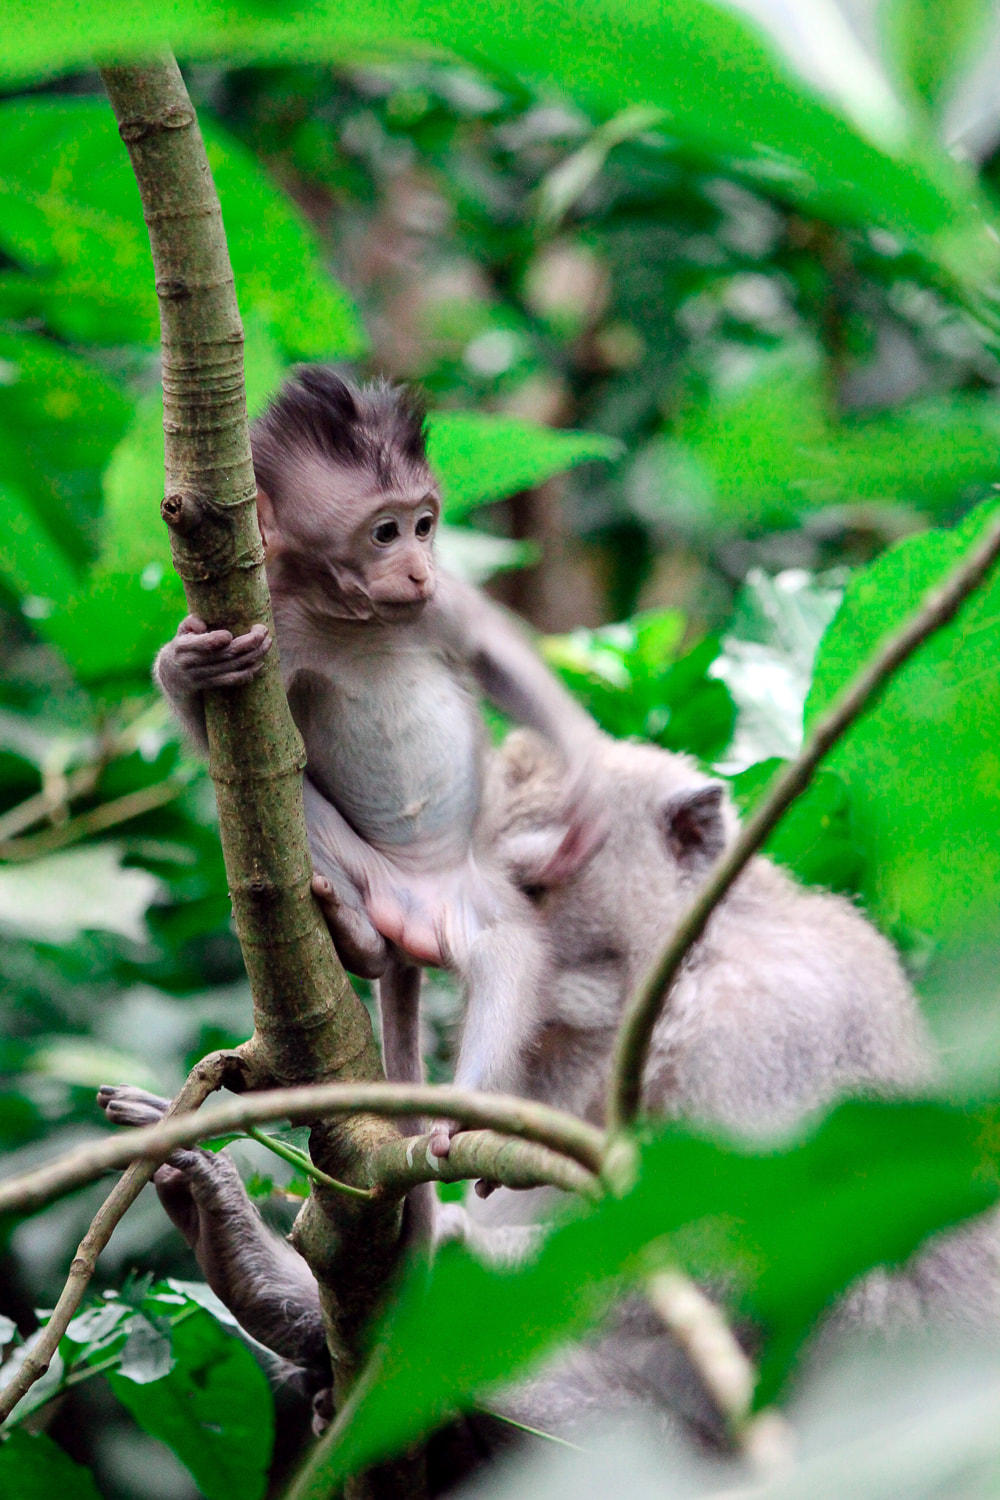 A baby grey-haired, long-tail, macaque climbing a tree. Sacred Monkey Forest Sanctuary, Ubud, Bali, Indonesia.